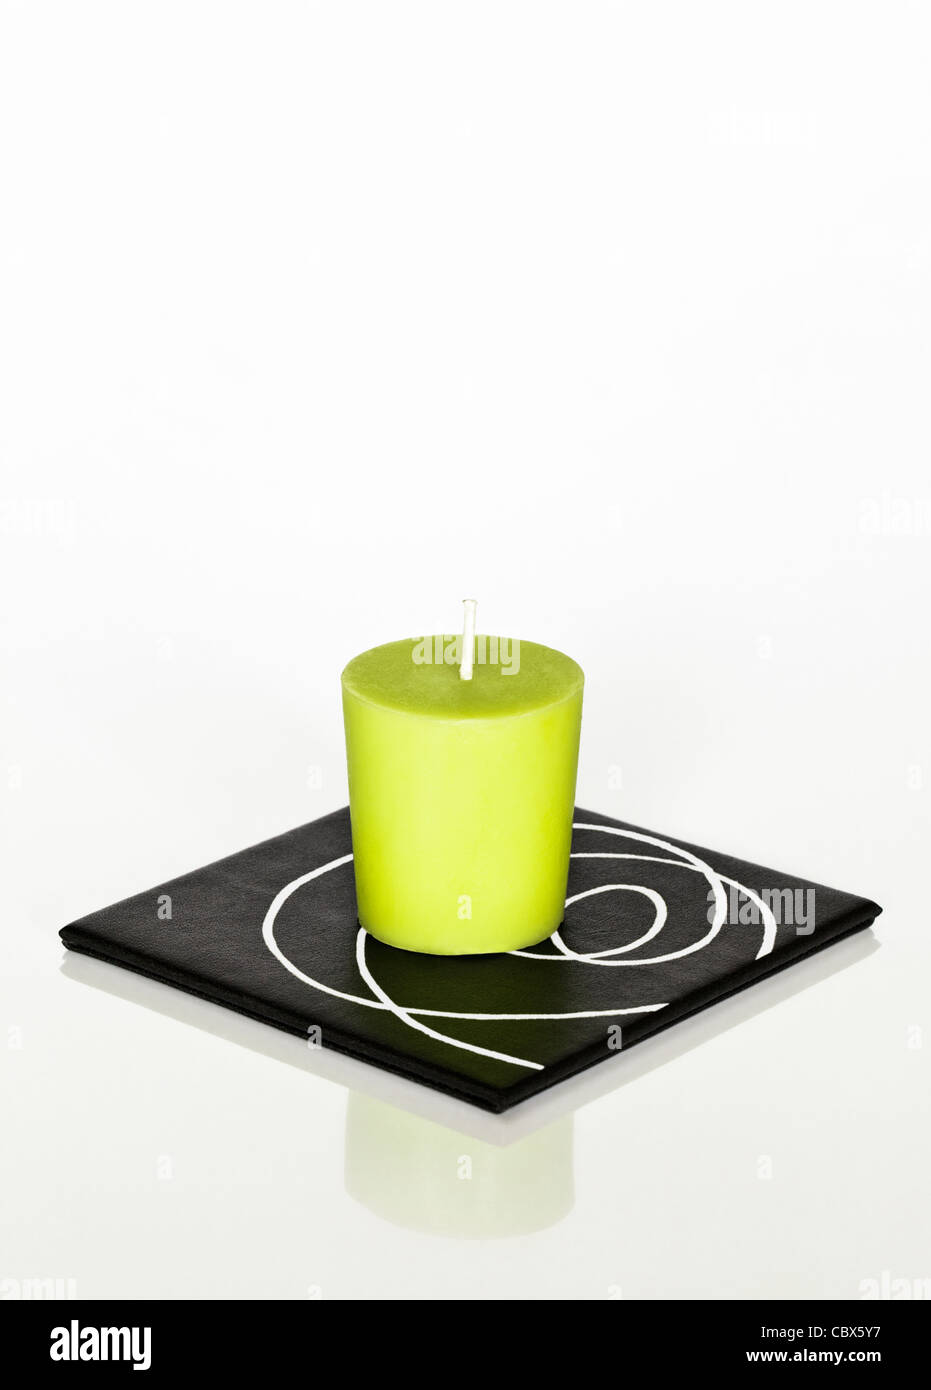 One green candle on square coaster Stock Photo